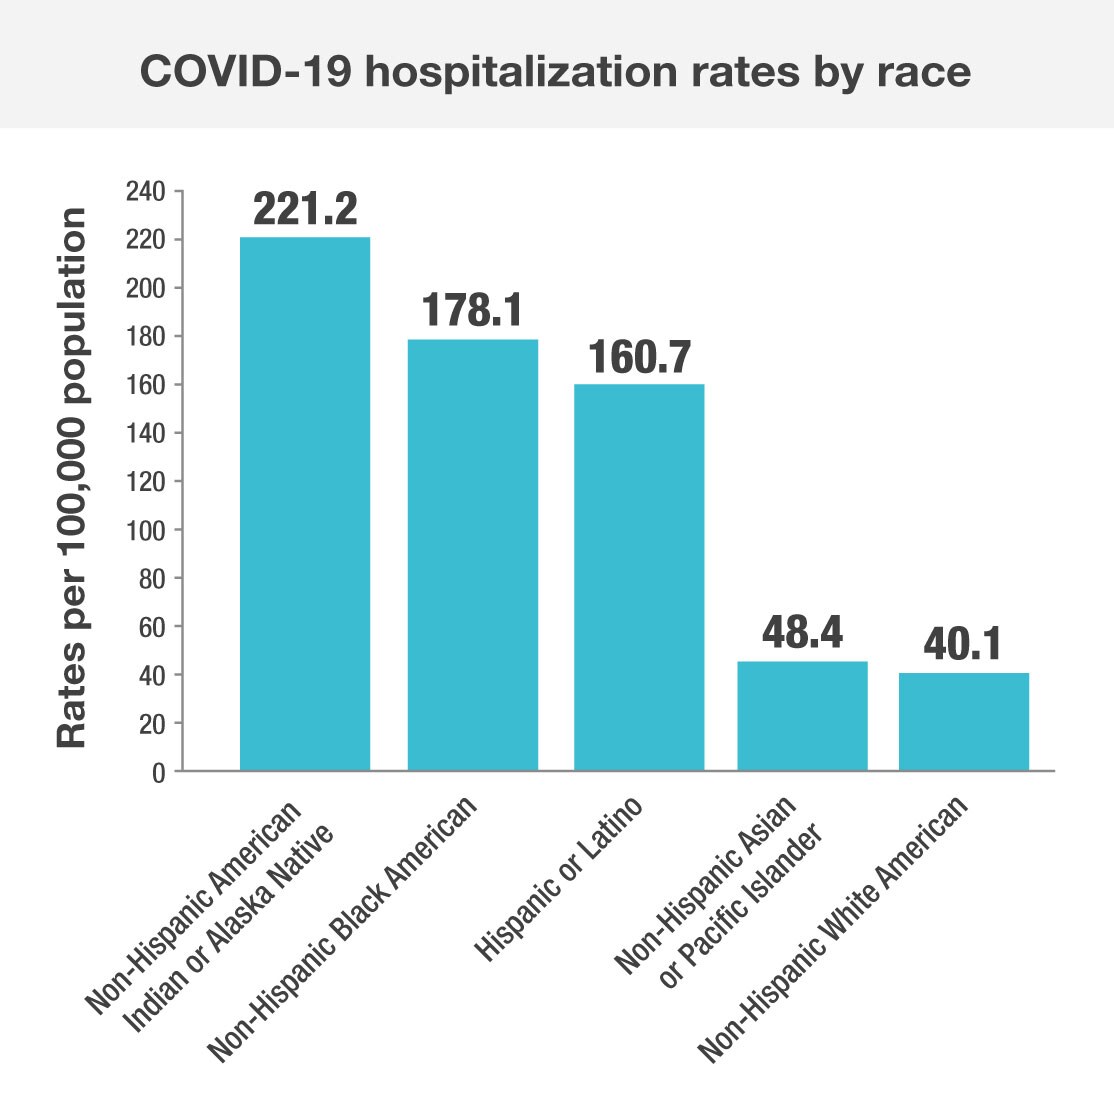 COVID-19 hospitalization rates by race